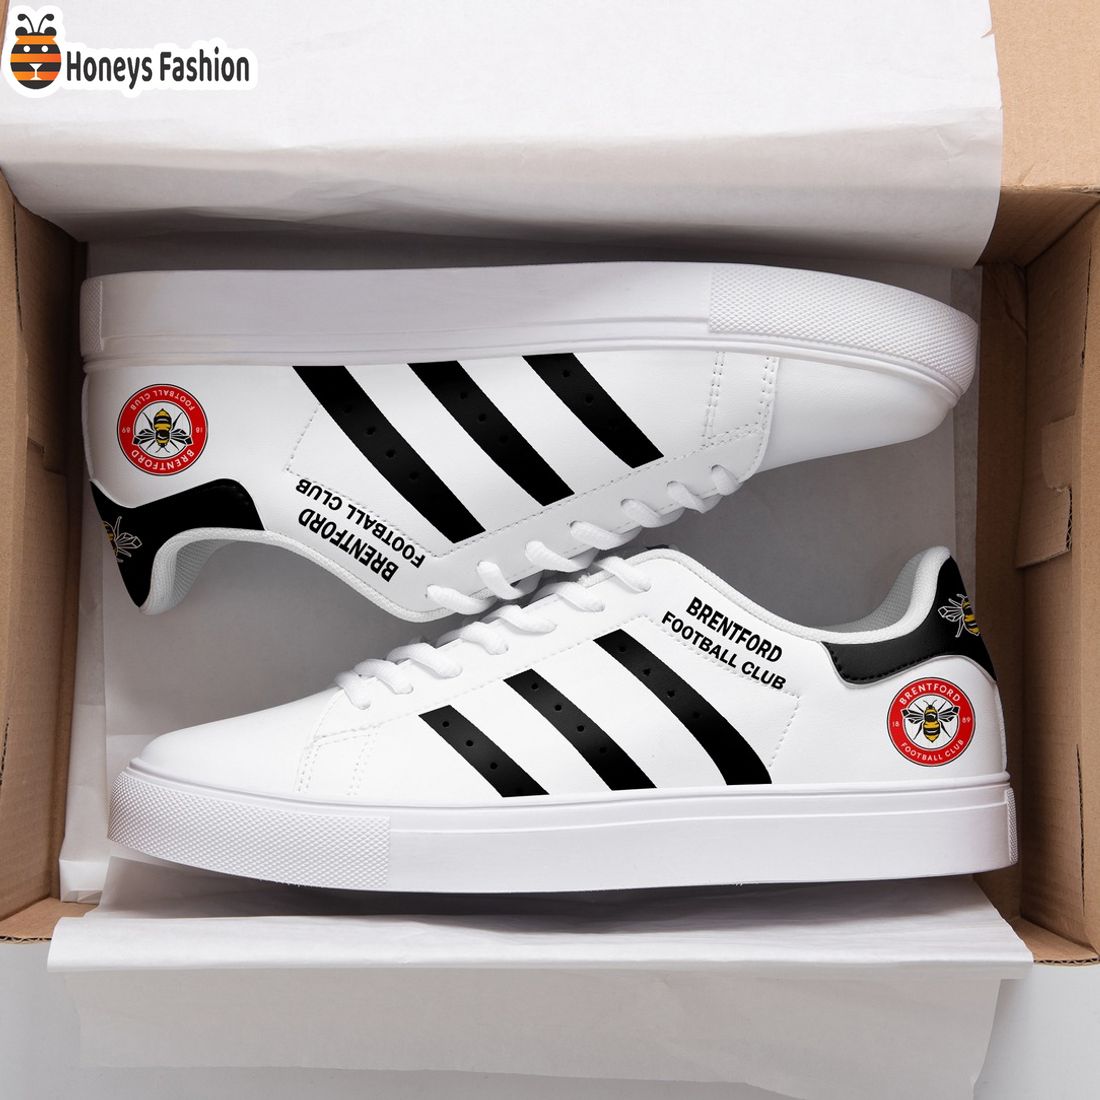 Brentford EPL Adidas Stan Smith Trainers